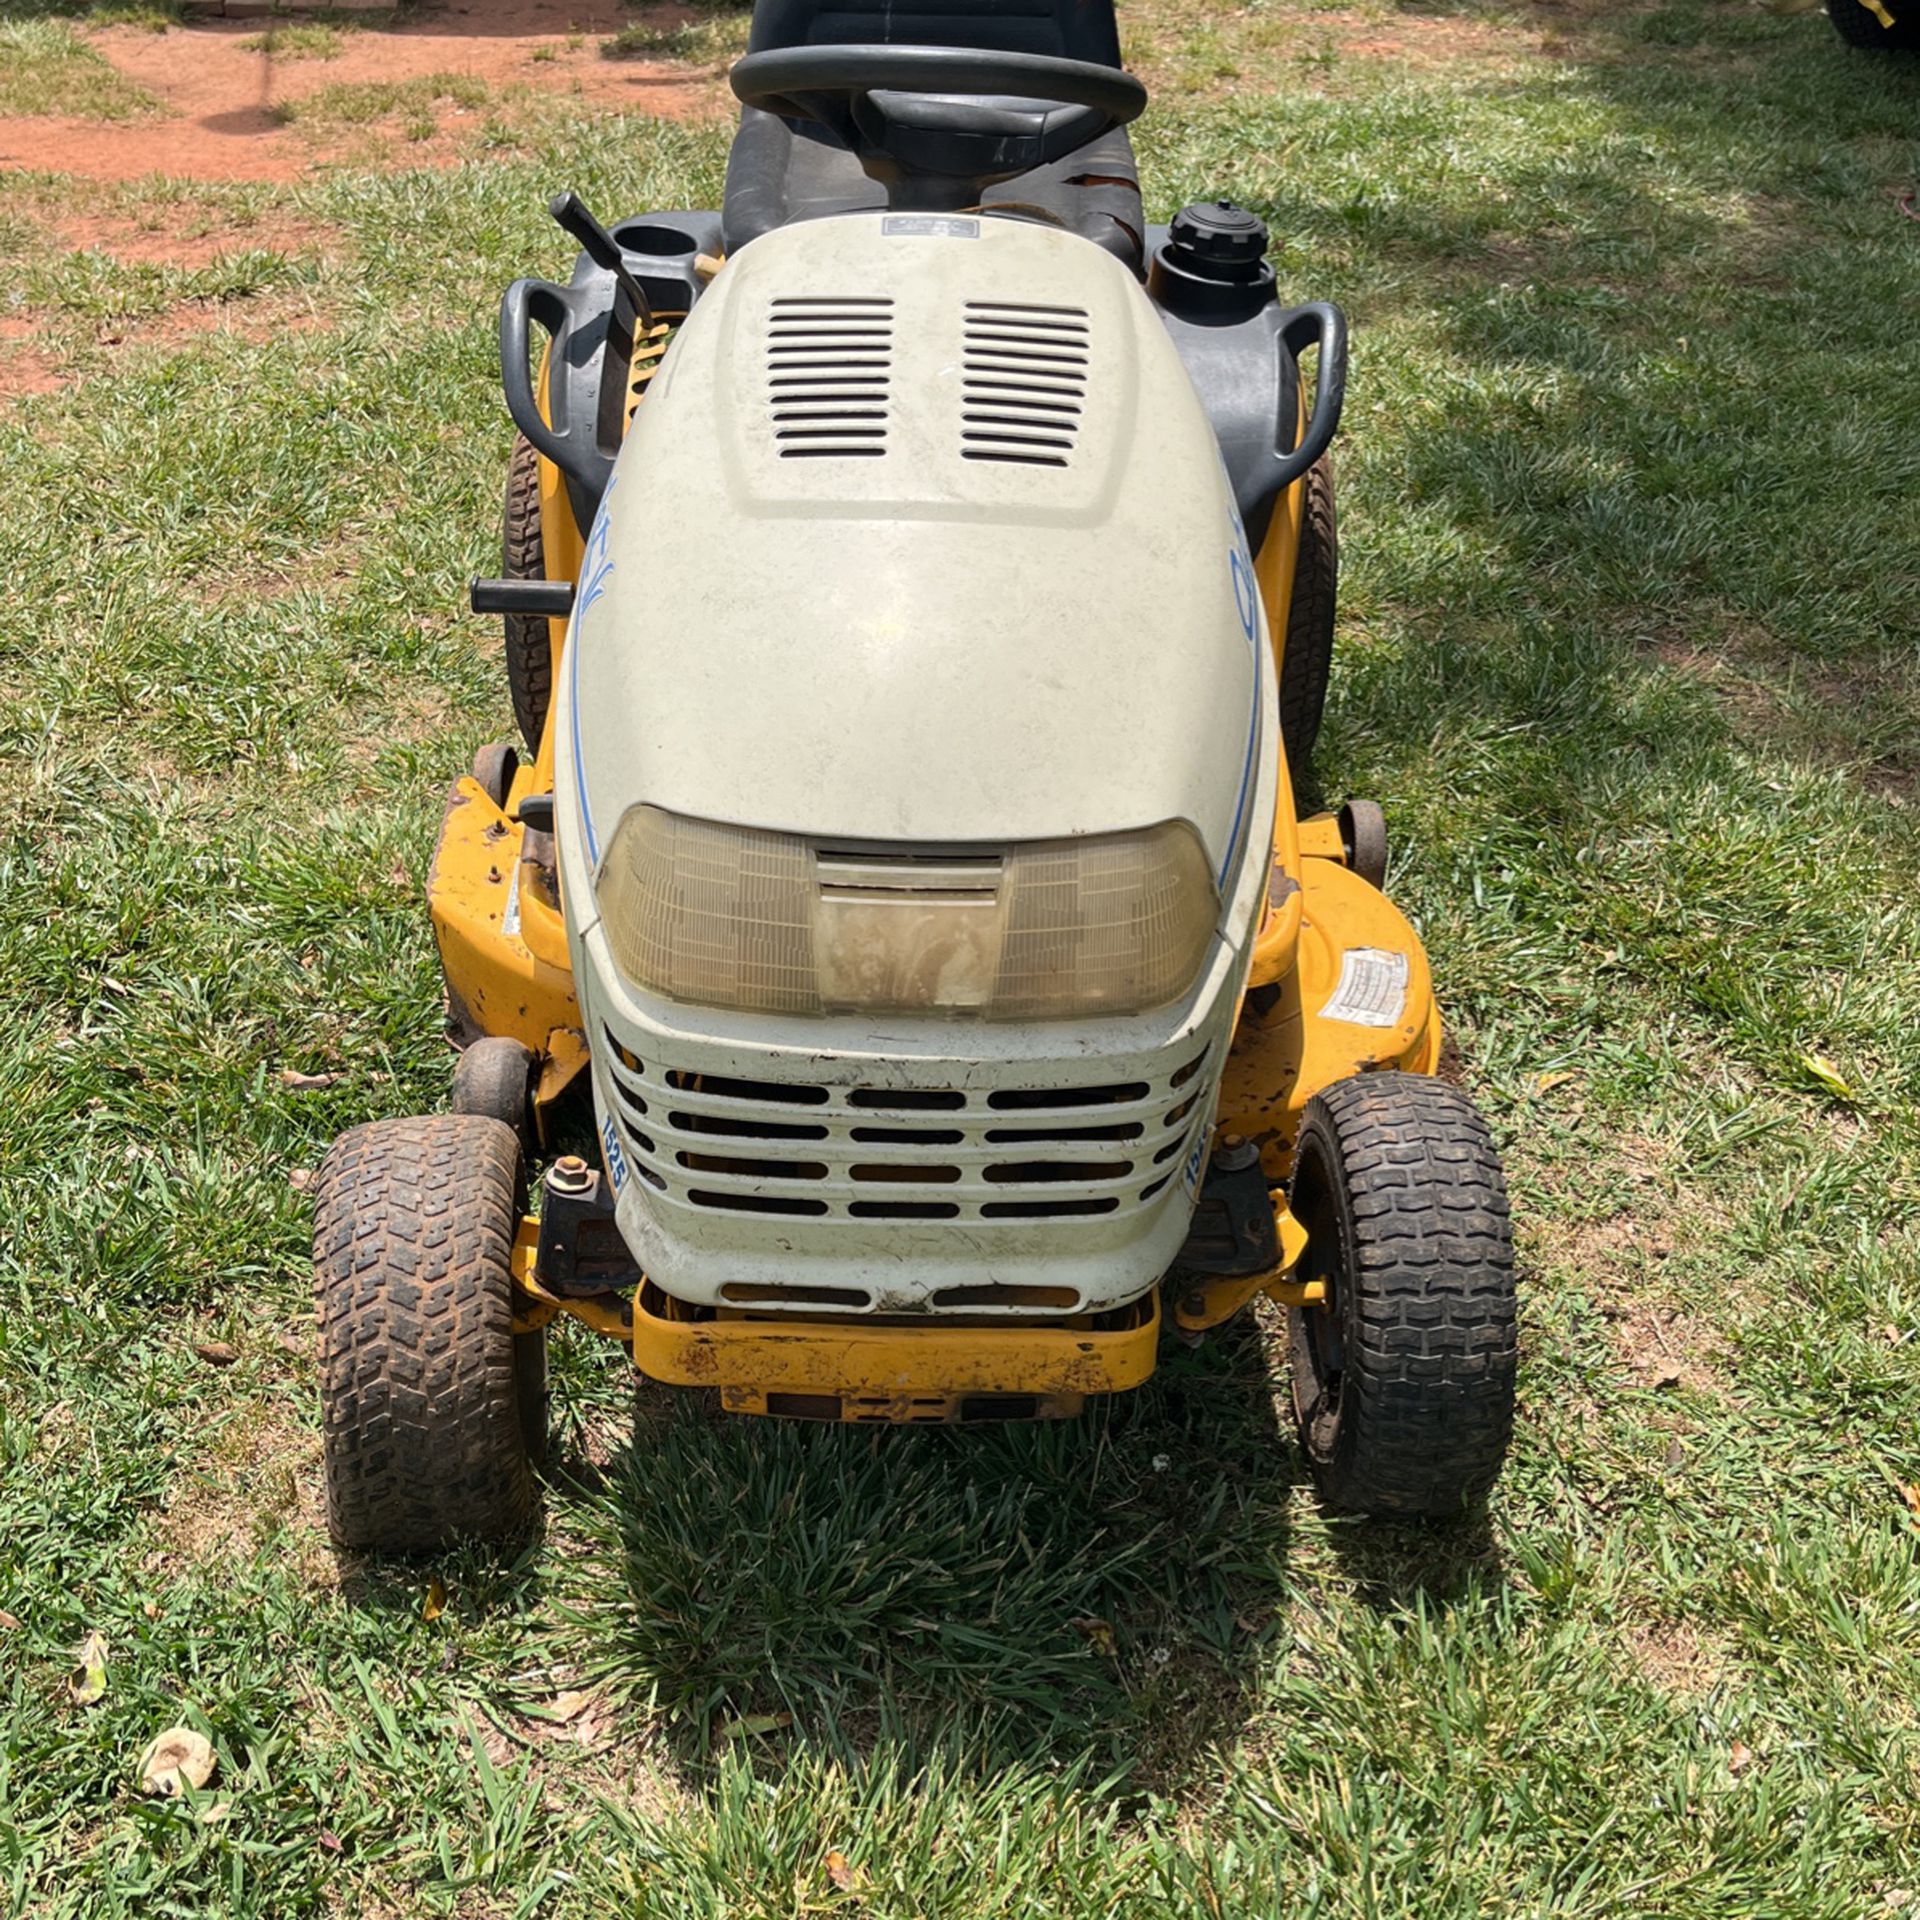 Cub Cadet 1525 Firm On Price for Sale in Cowpens, SC - OfferUp